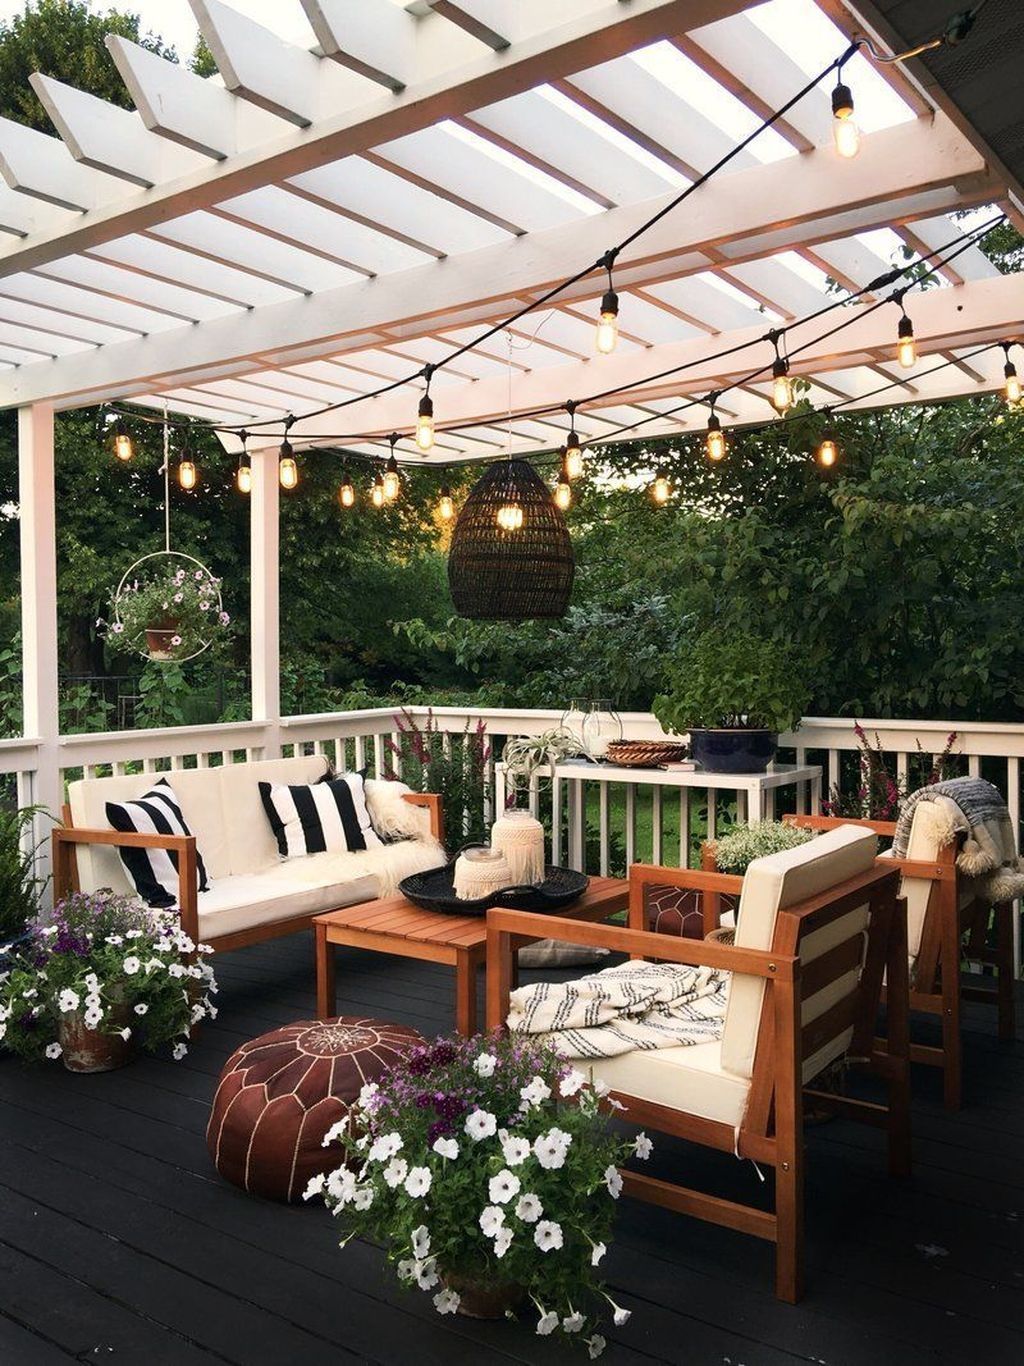 Pergola Bois Charmant Stylish 30 Favorite Outdoor Rooms Ideas to Upgrade Your